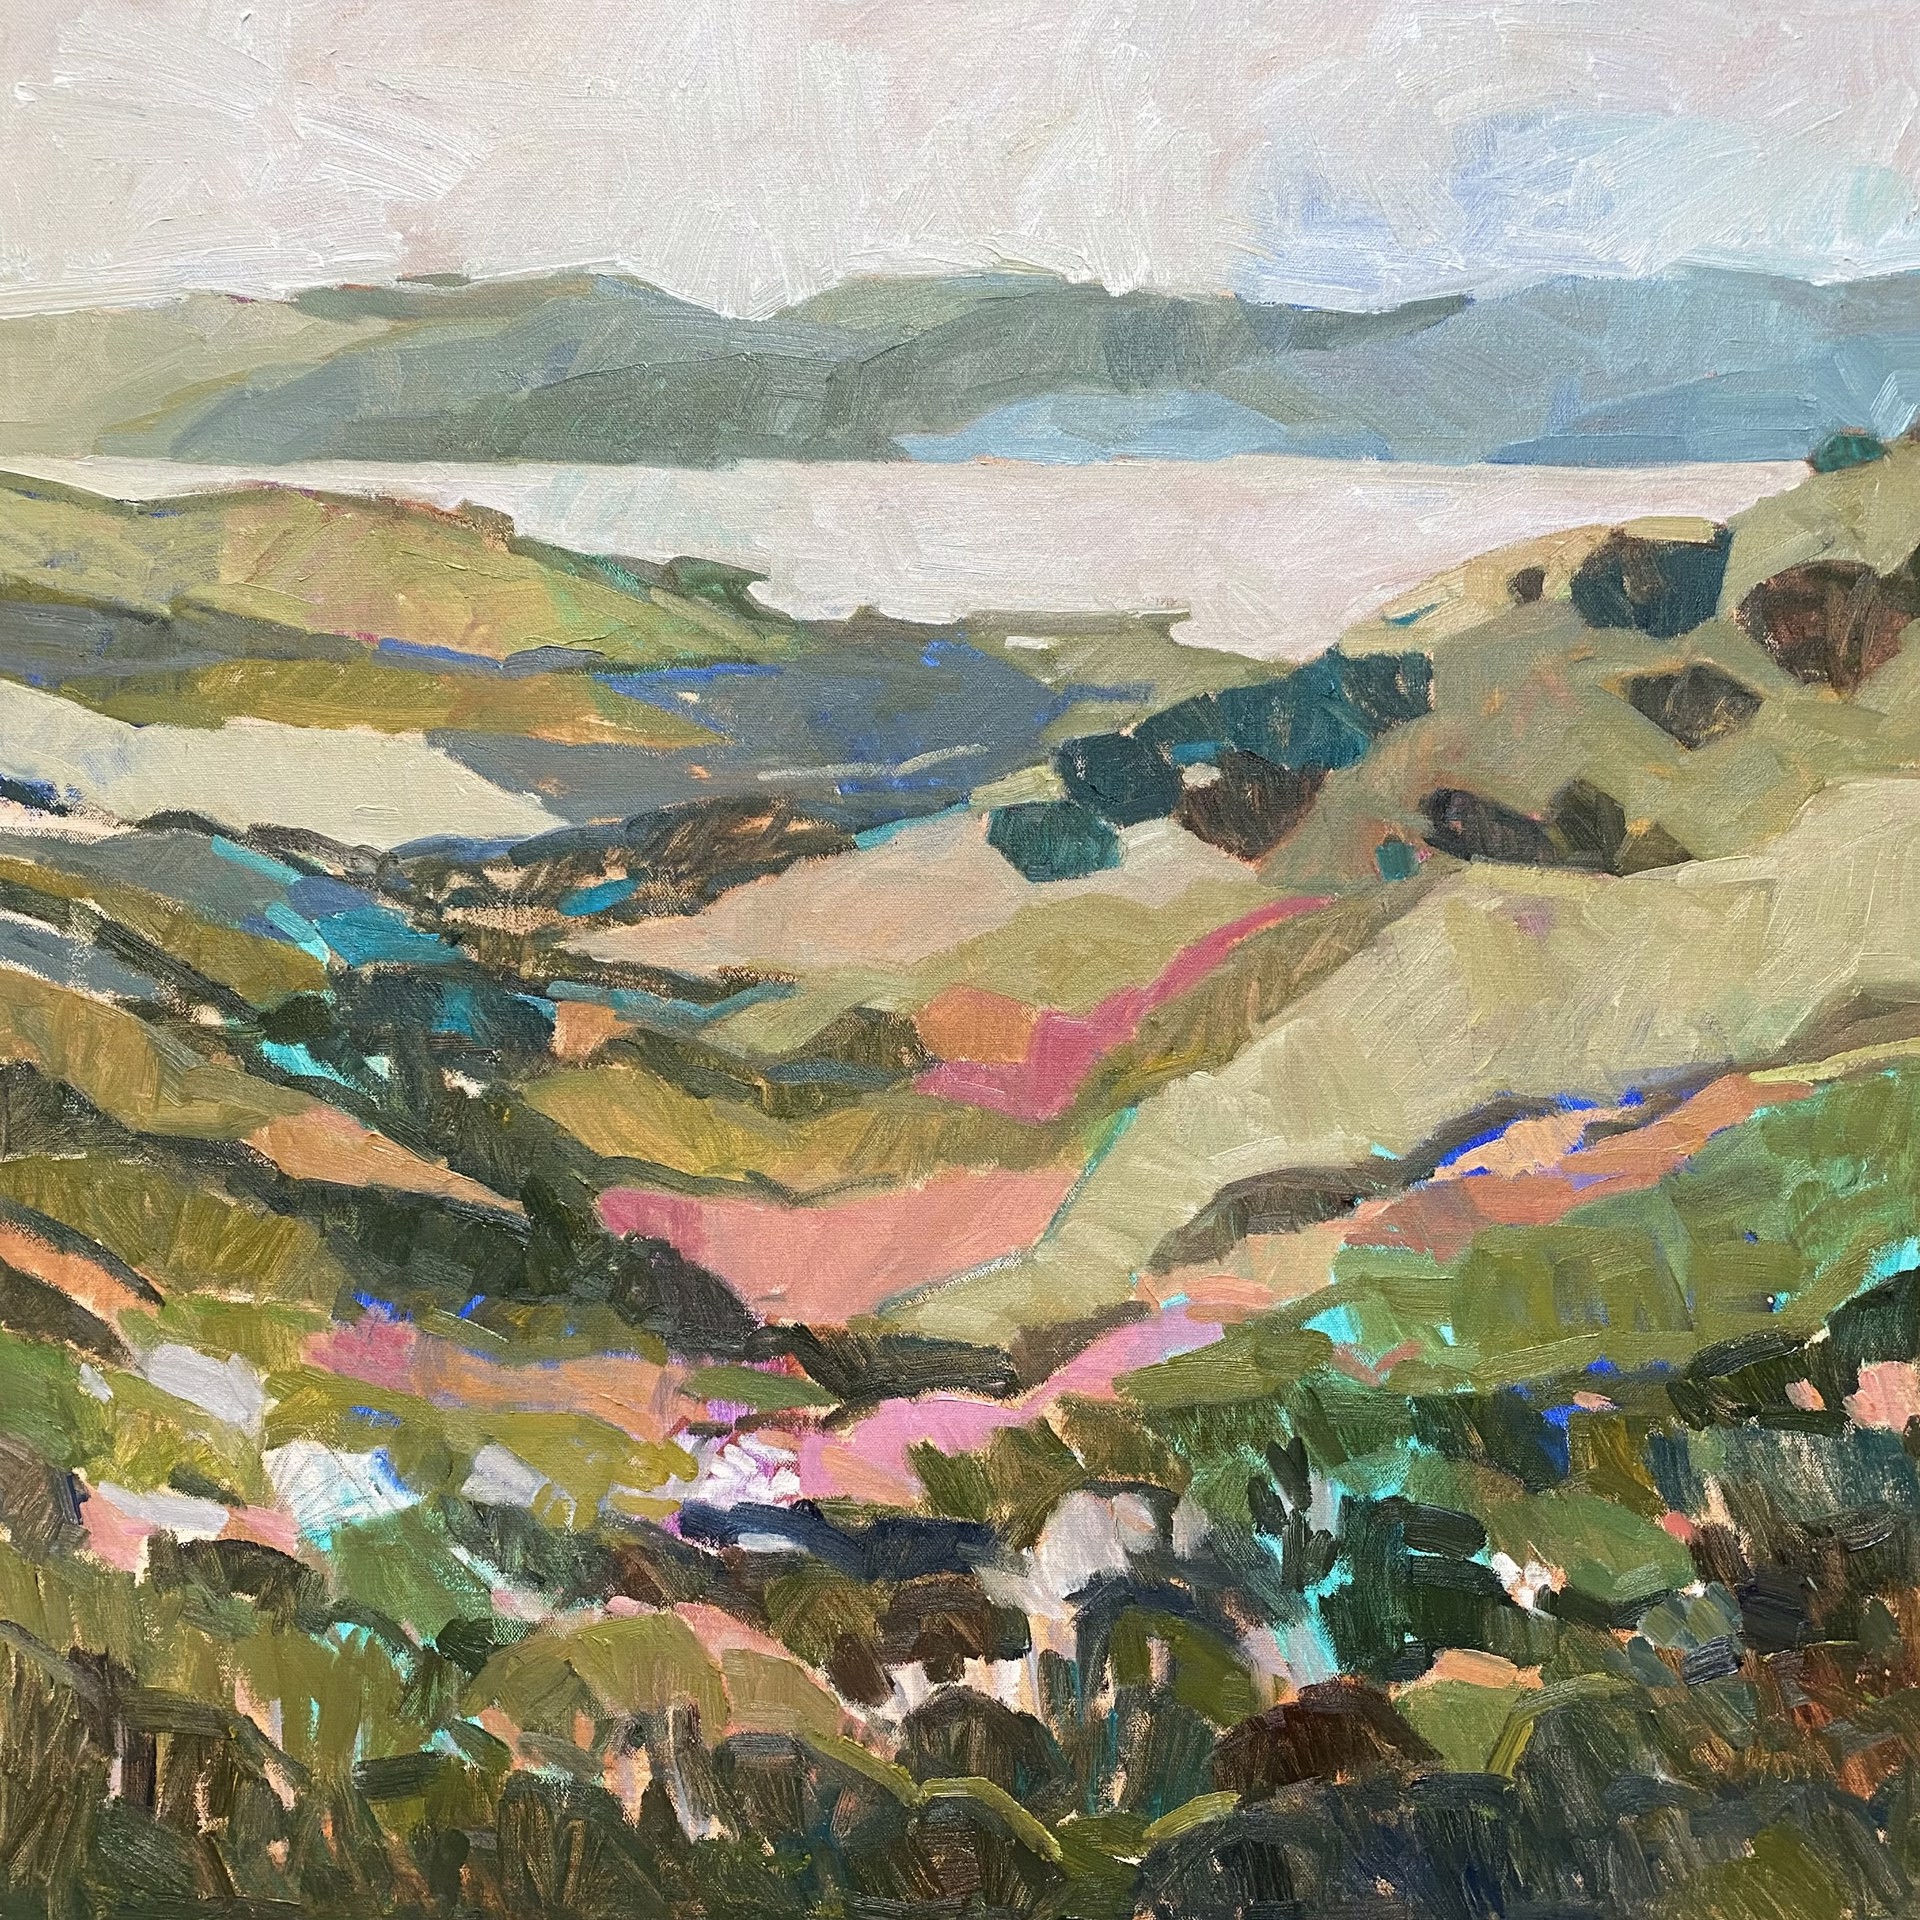 A Round of Applause for Tomales Bay {SOLD} by Liana Steinmetz